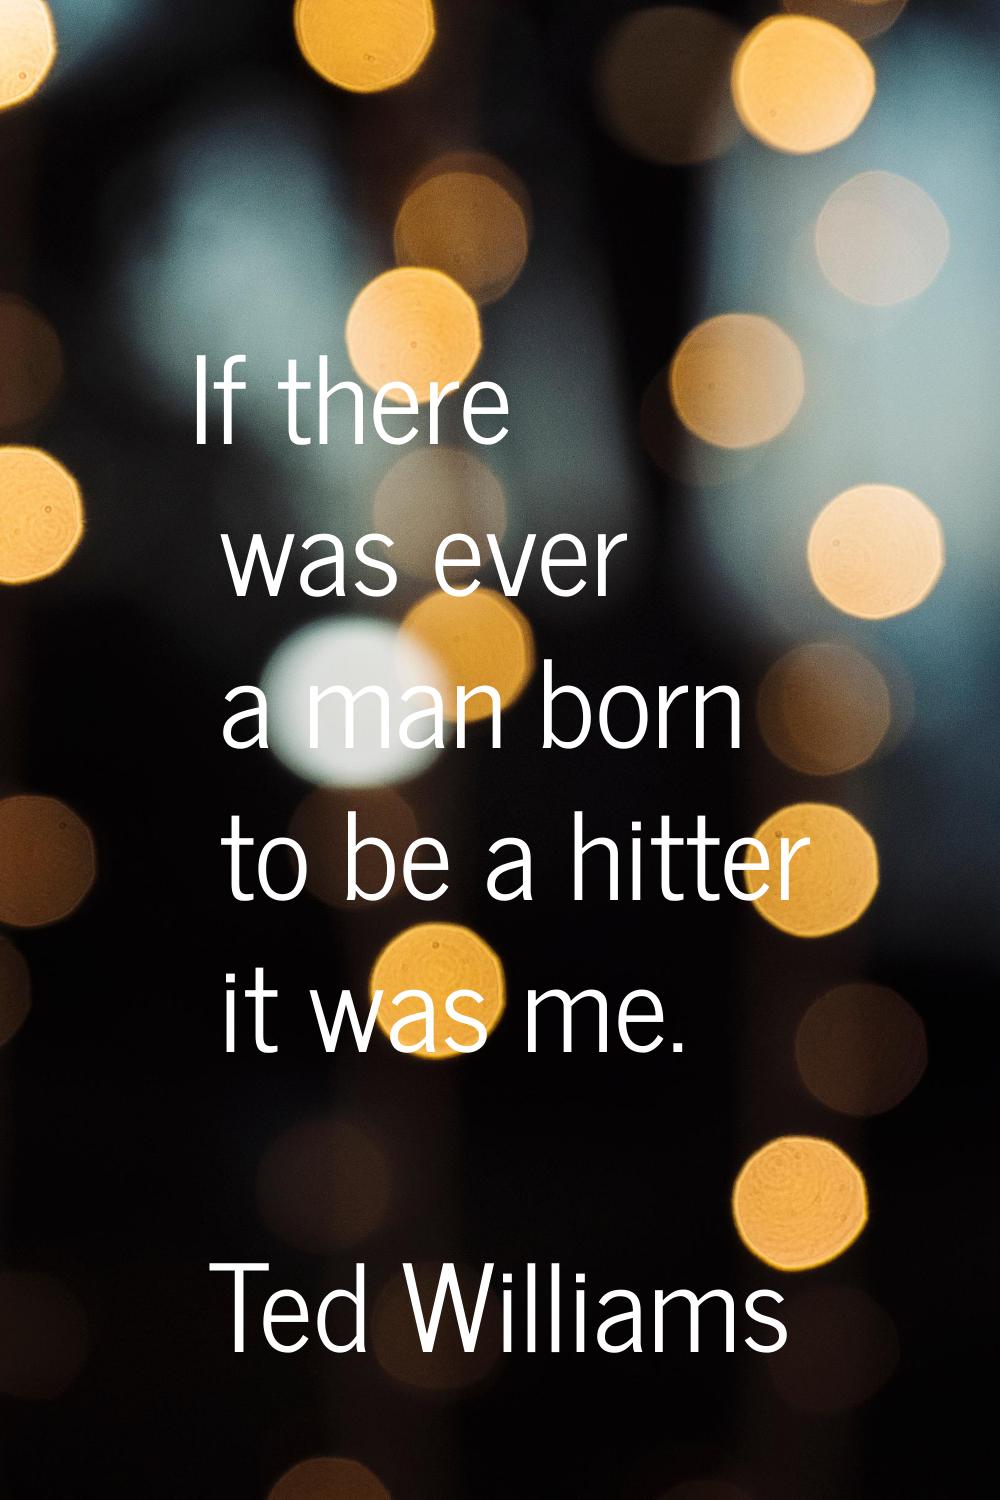 If there was ever a man born to be a hitter it was me.